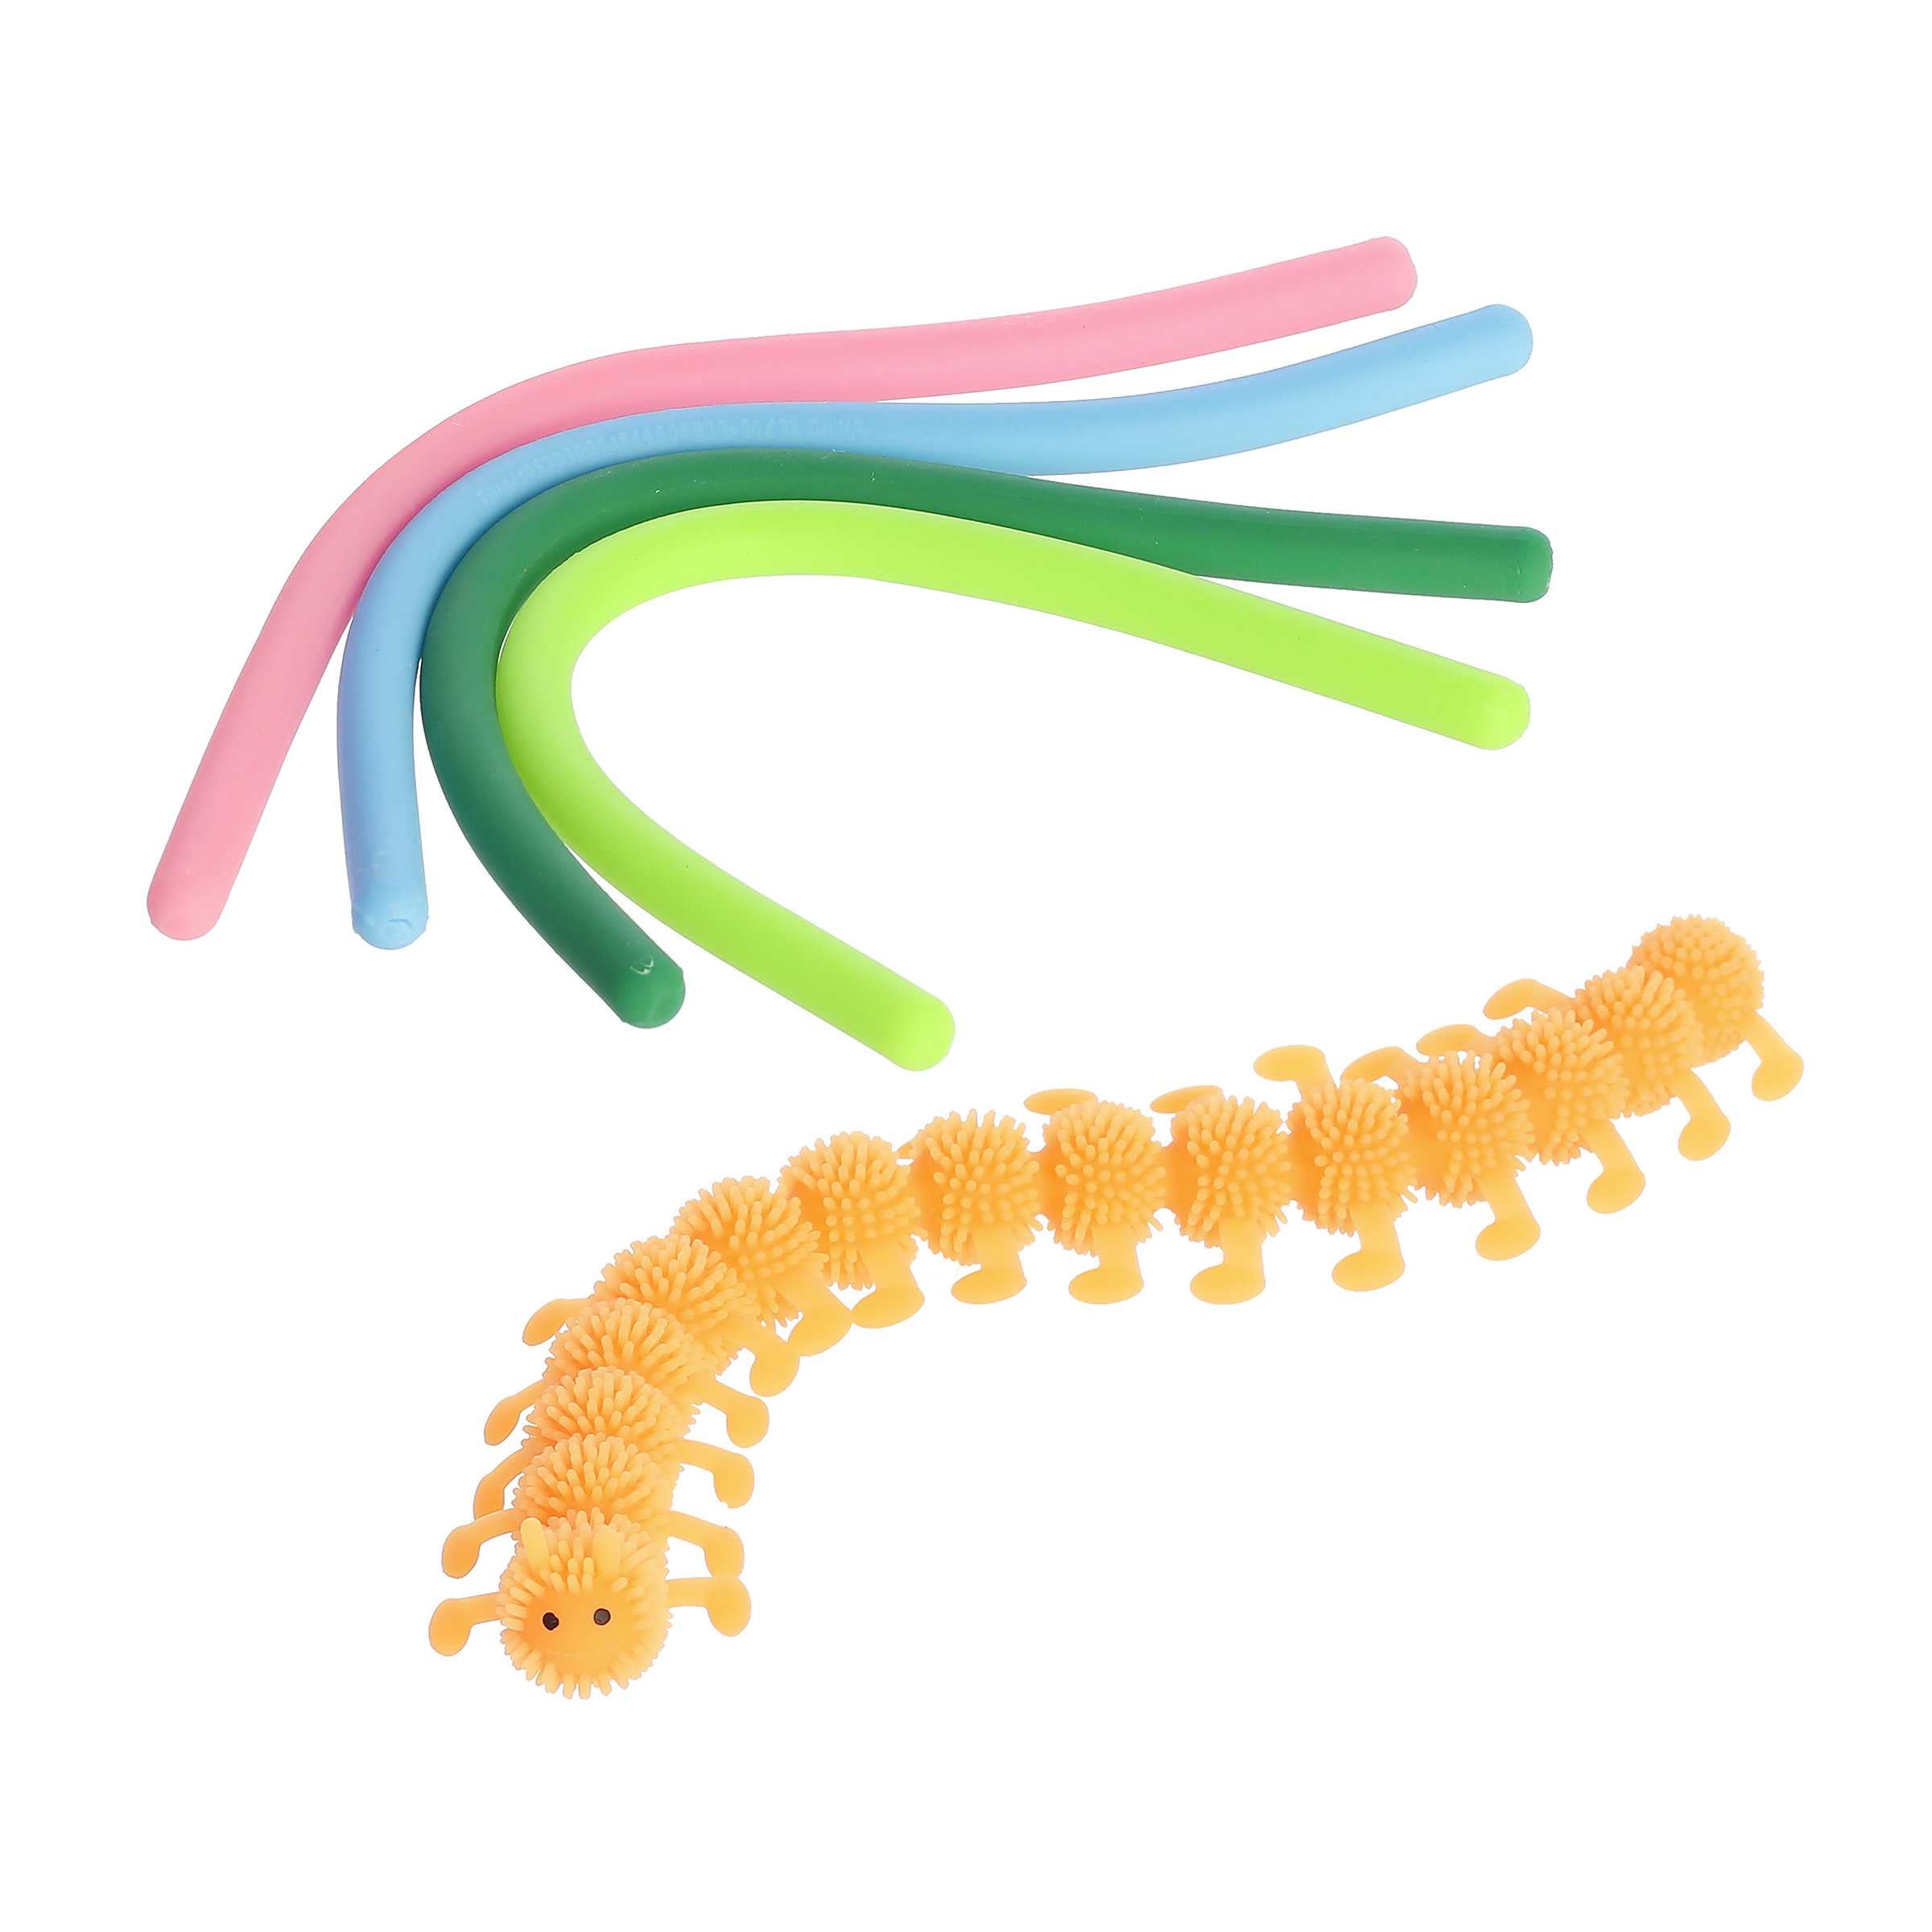 Caterpillar Stretchies, featuring a squishy body and vibrant strings, ideal for encouraging sensory play